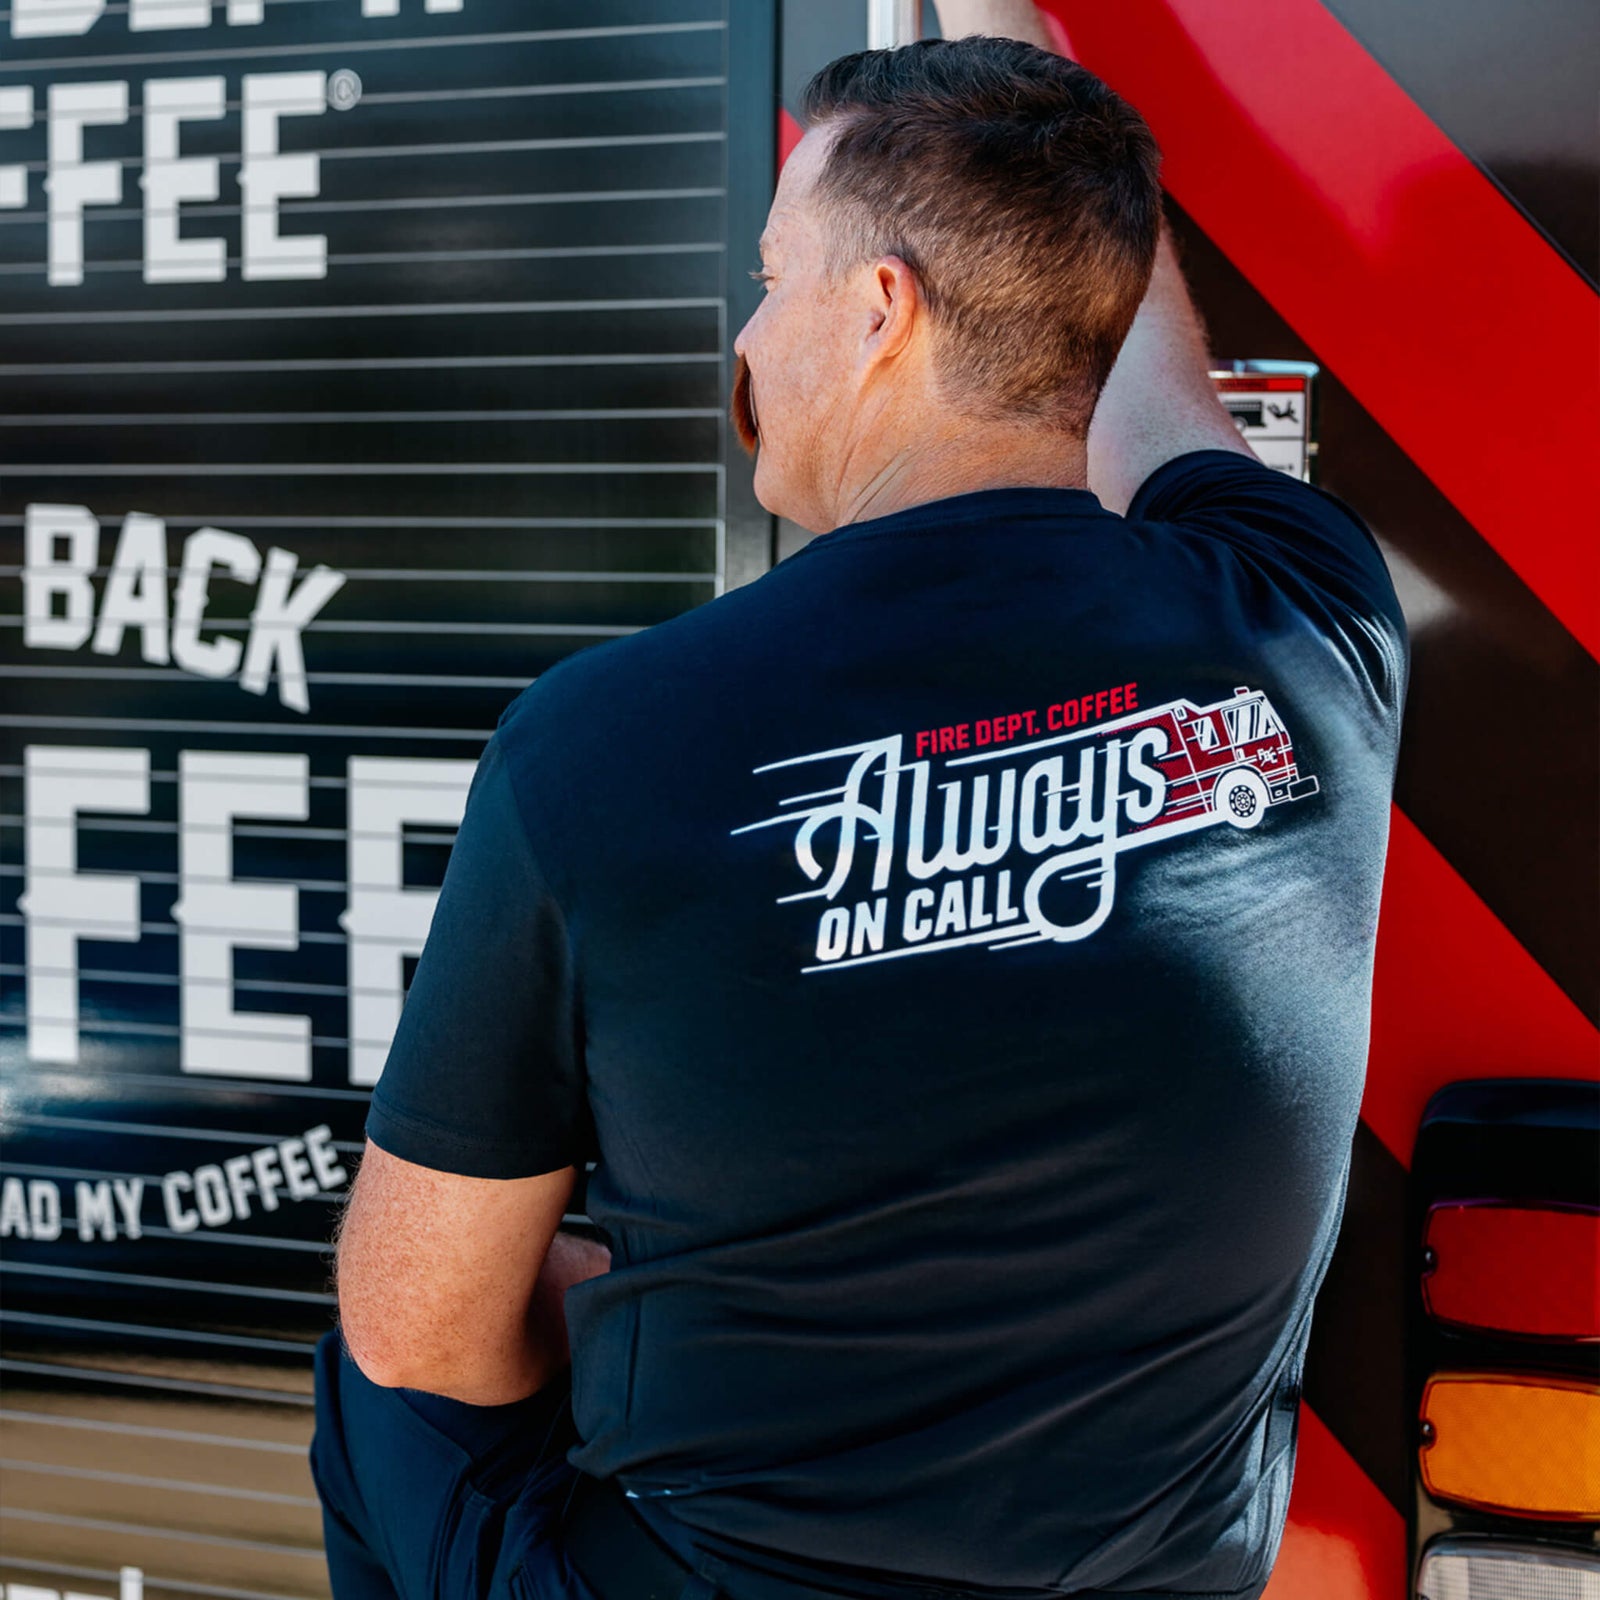 A shirt with an image of a fire truck rushing towards a job with the text "Fire Dept. Coffee Always On Call" written on it